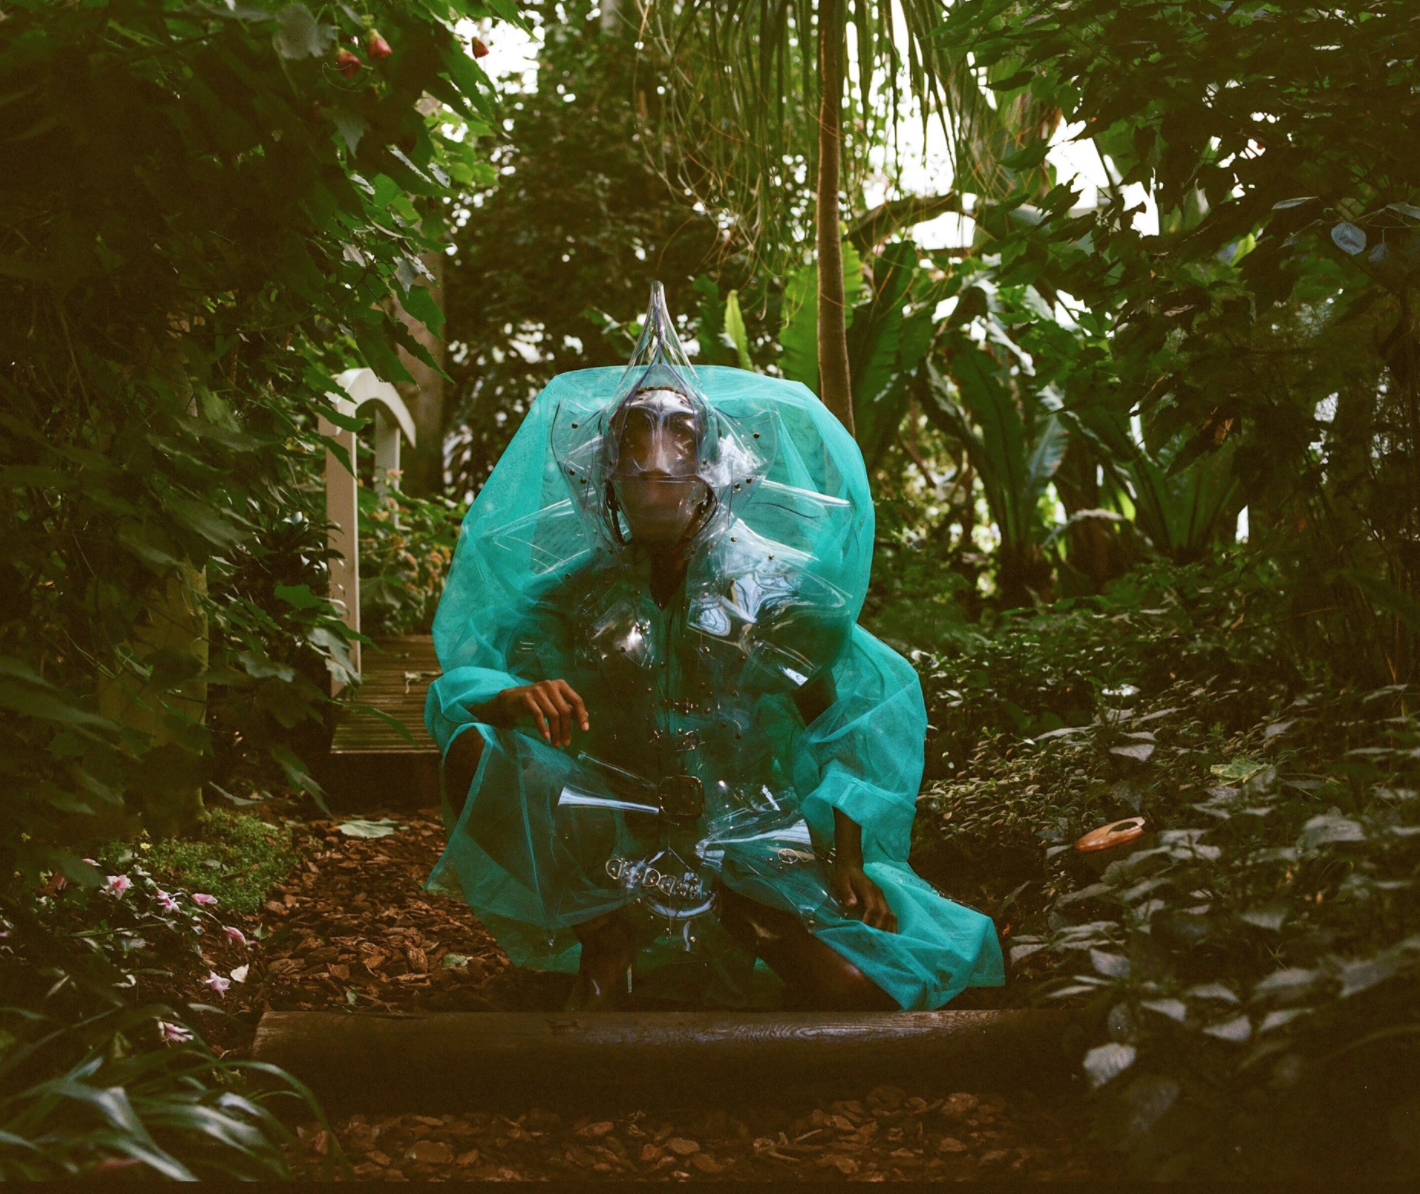 A photograph of a person dressed with an alien mask wearing puffy translucent green garbage bags that also bubble up over a device strapped to their back. They squat in the center framed by a lush green forest.